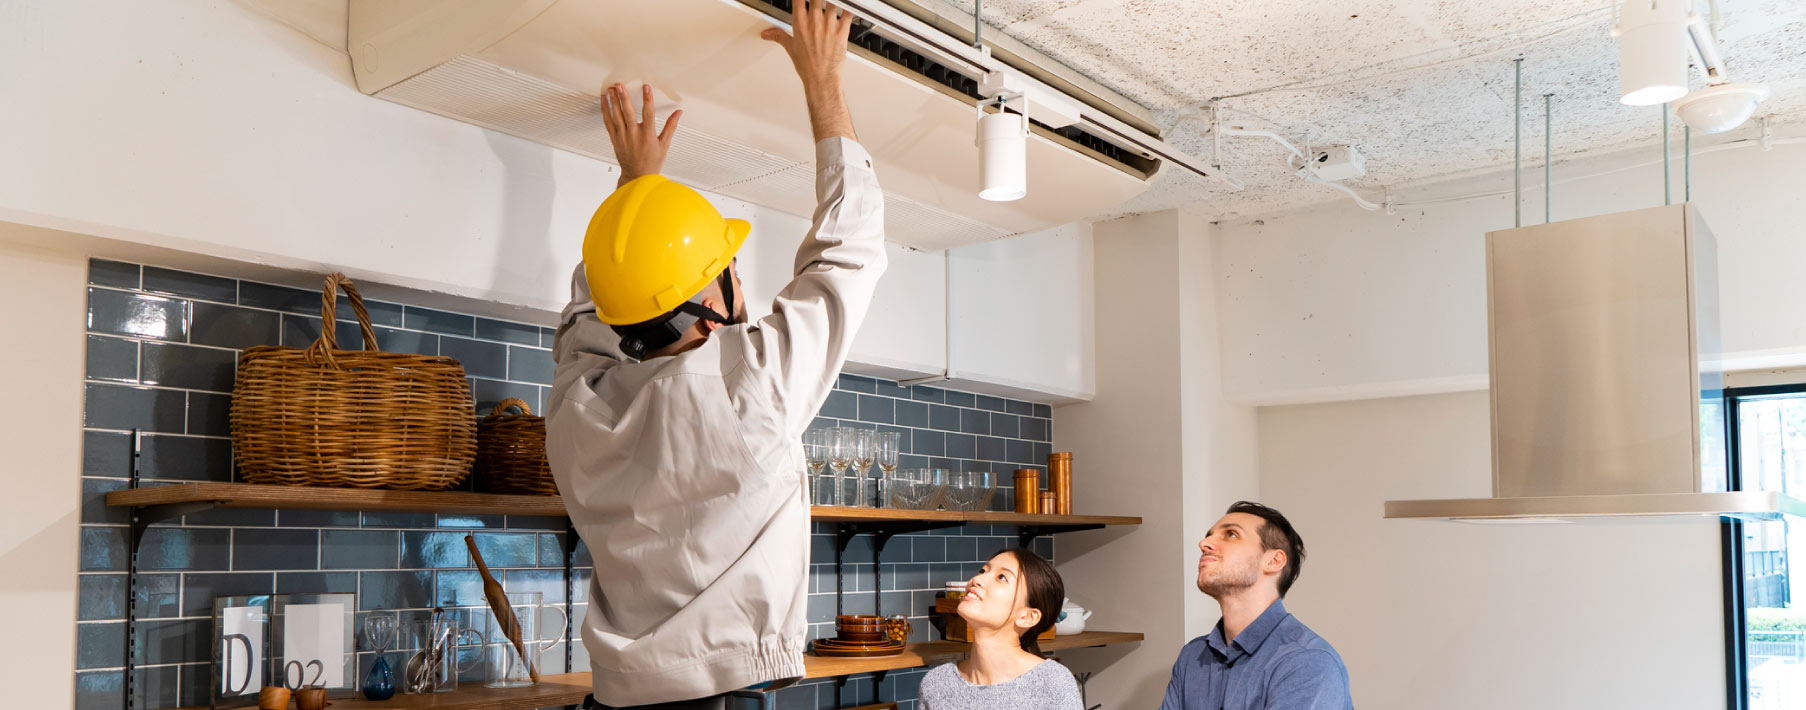 A worker with a hard hat working on something on the ceiling in the kitchen with a couple looking on